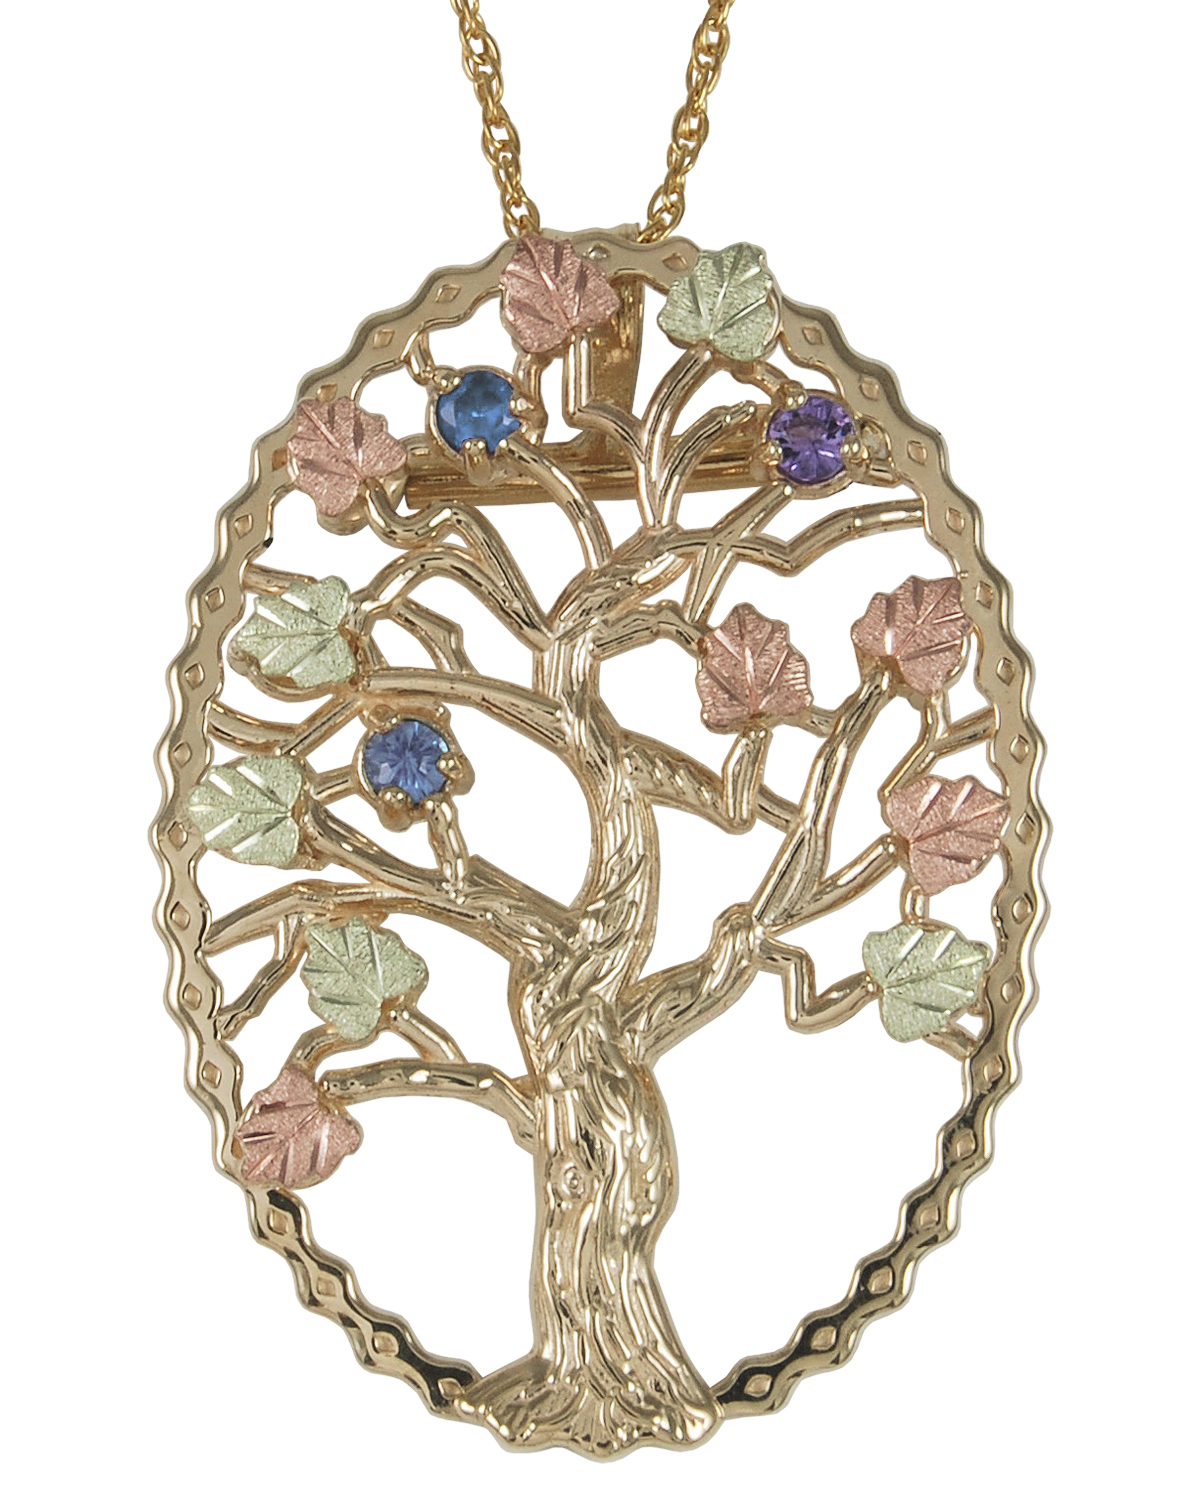 Sapphire, Amethyst and Aquamarine Tree Pendant Necklace, 10k Yellow Gold, 12k Green and Rose Gold Black Hills Gold Motif